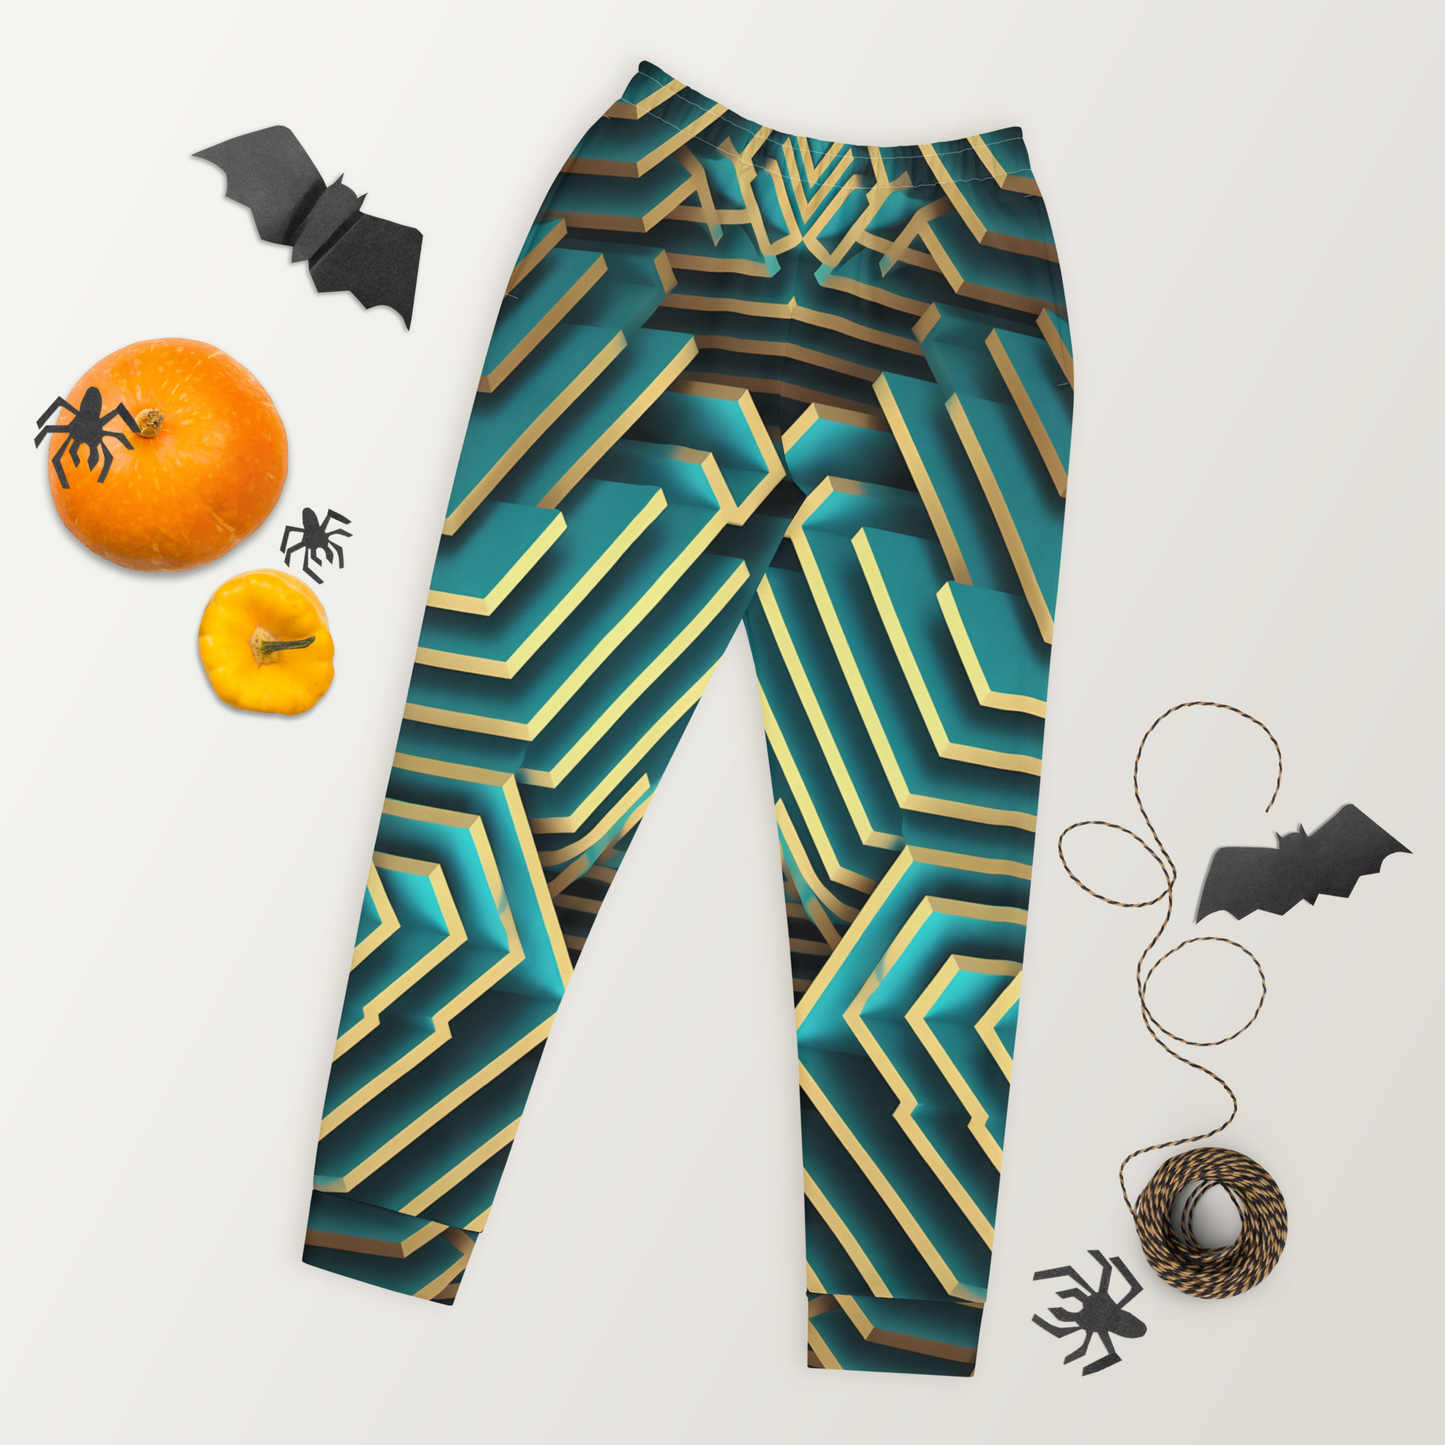 3D Maze Illusion | 3D Patterns | All-Over Print Women's Joggers - #5